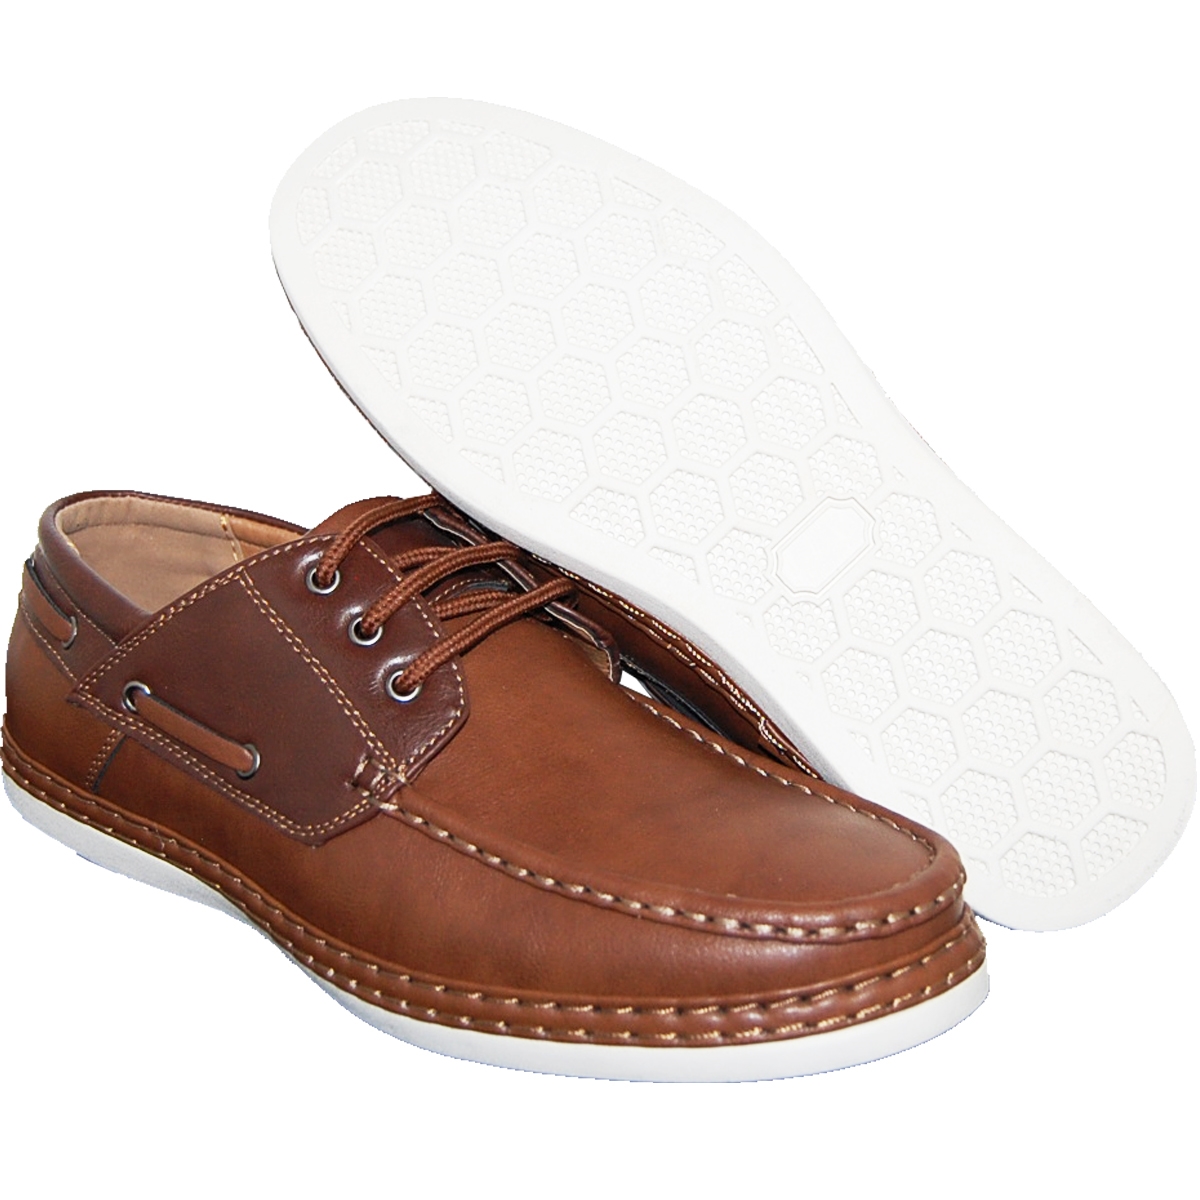 light boat shoes